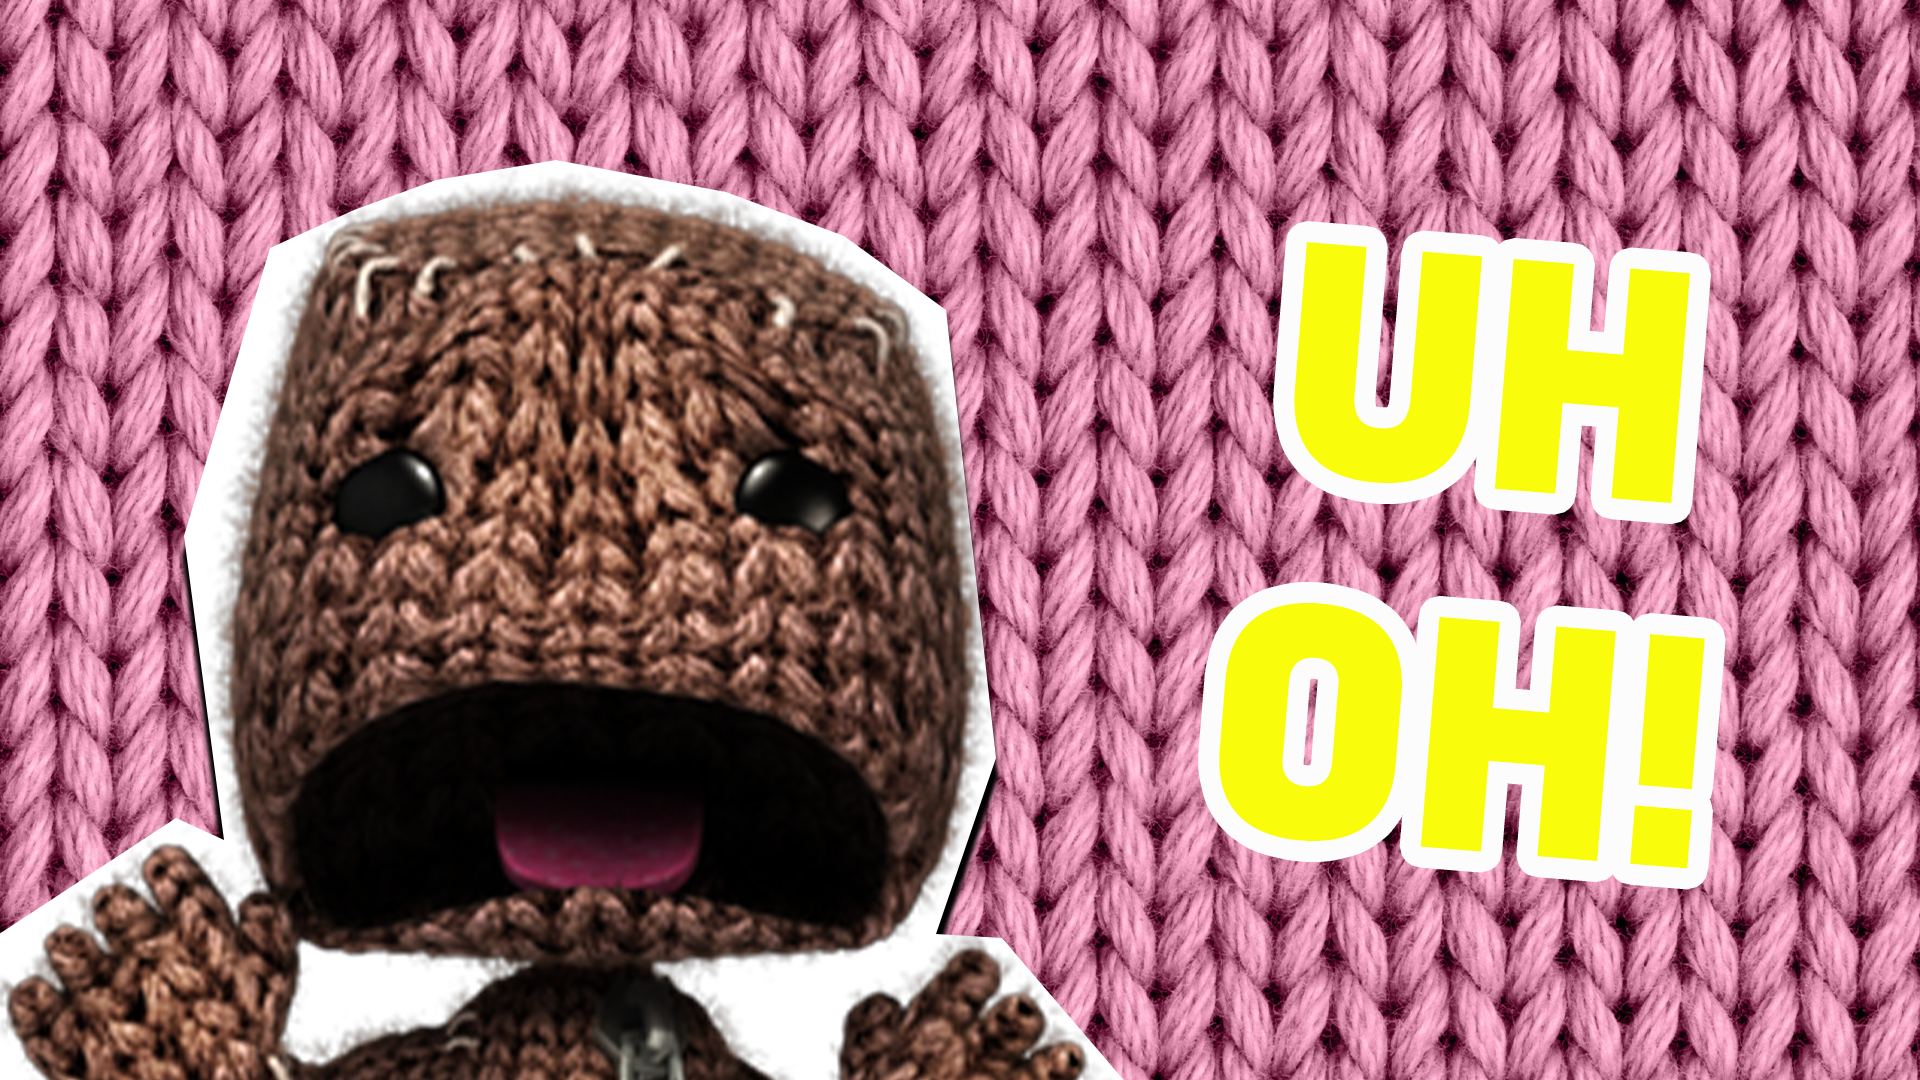 Bad luck! You didn't manage to get any questions right on this LittleBigPLanet quiz! But don't worry, you can always have another go!